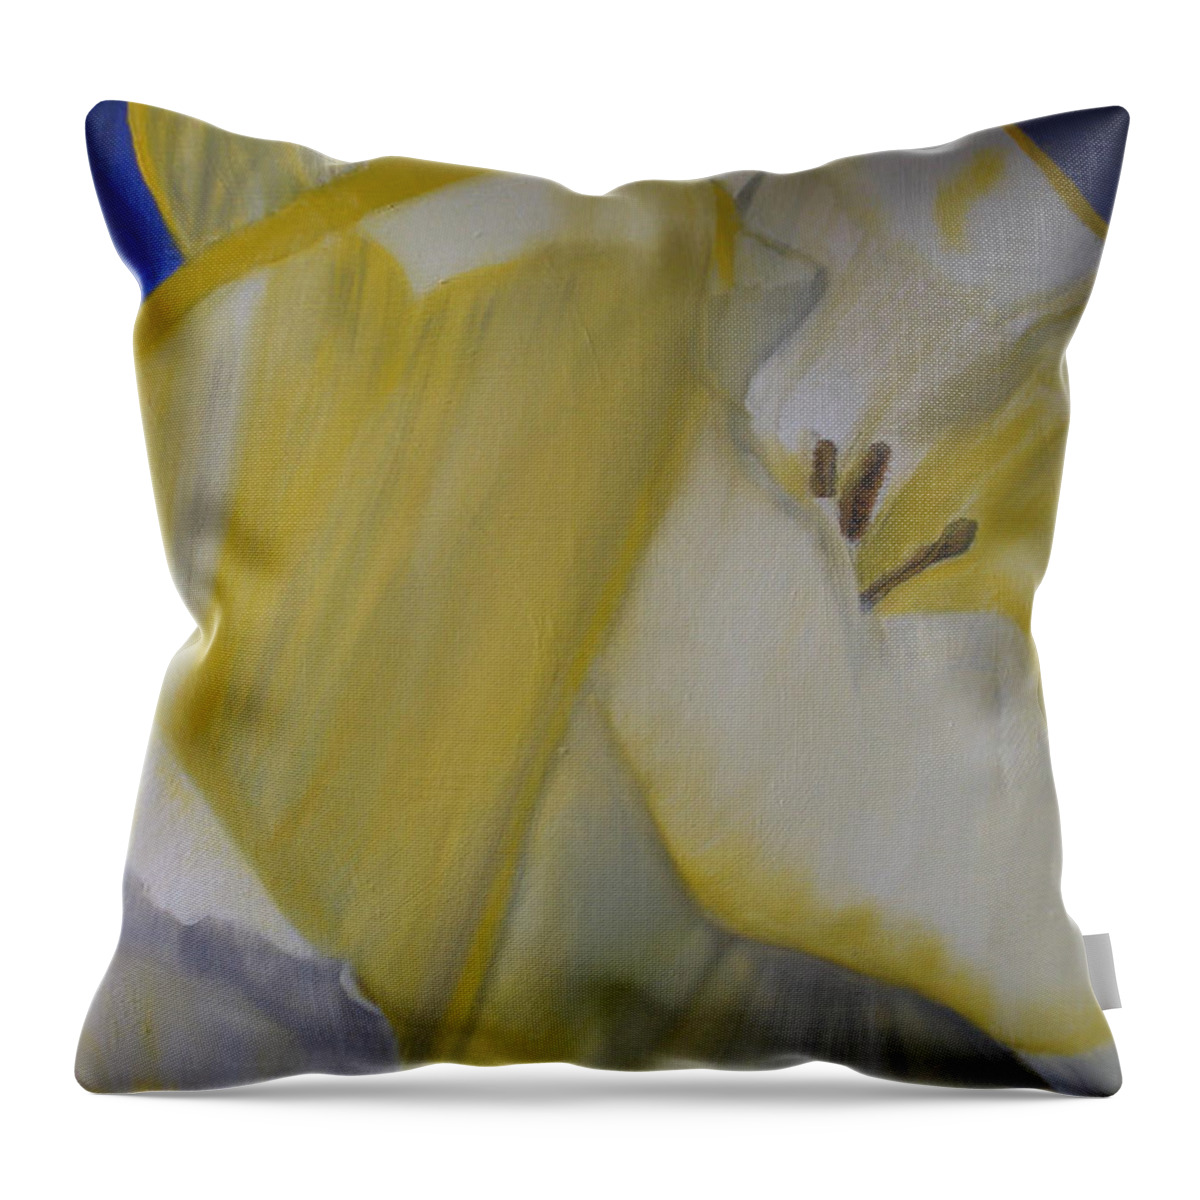 Flower Throw Pillow featuring the painting Daffodils by Claudia Goodell